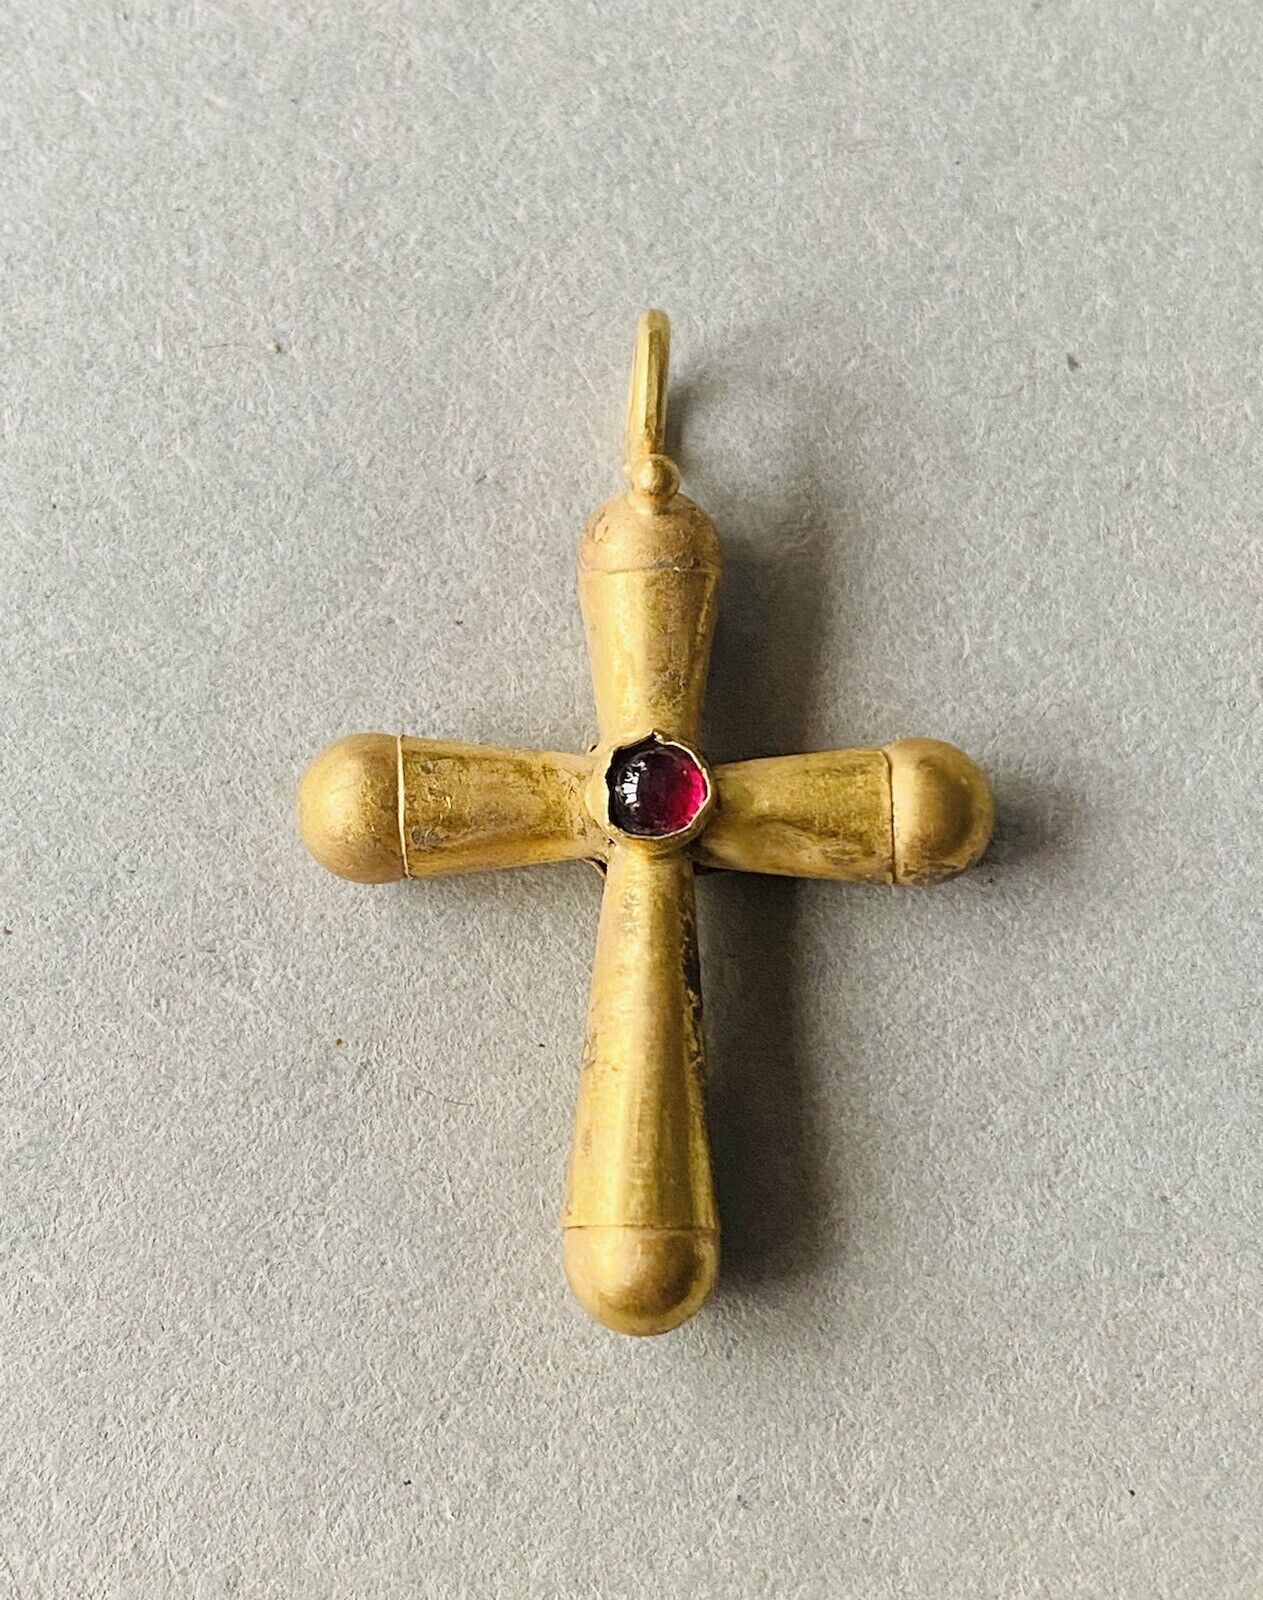 BEAUTIFUL Ancient Byzantine Gold Cross Pendant With Garnet C.6th-8th cent. A.D.